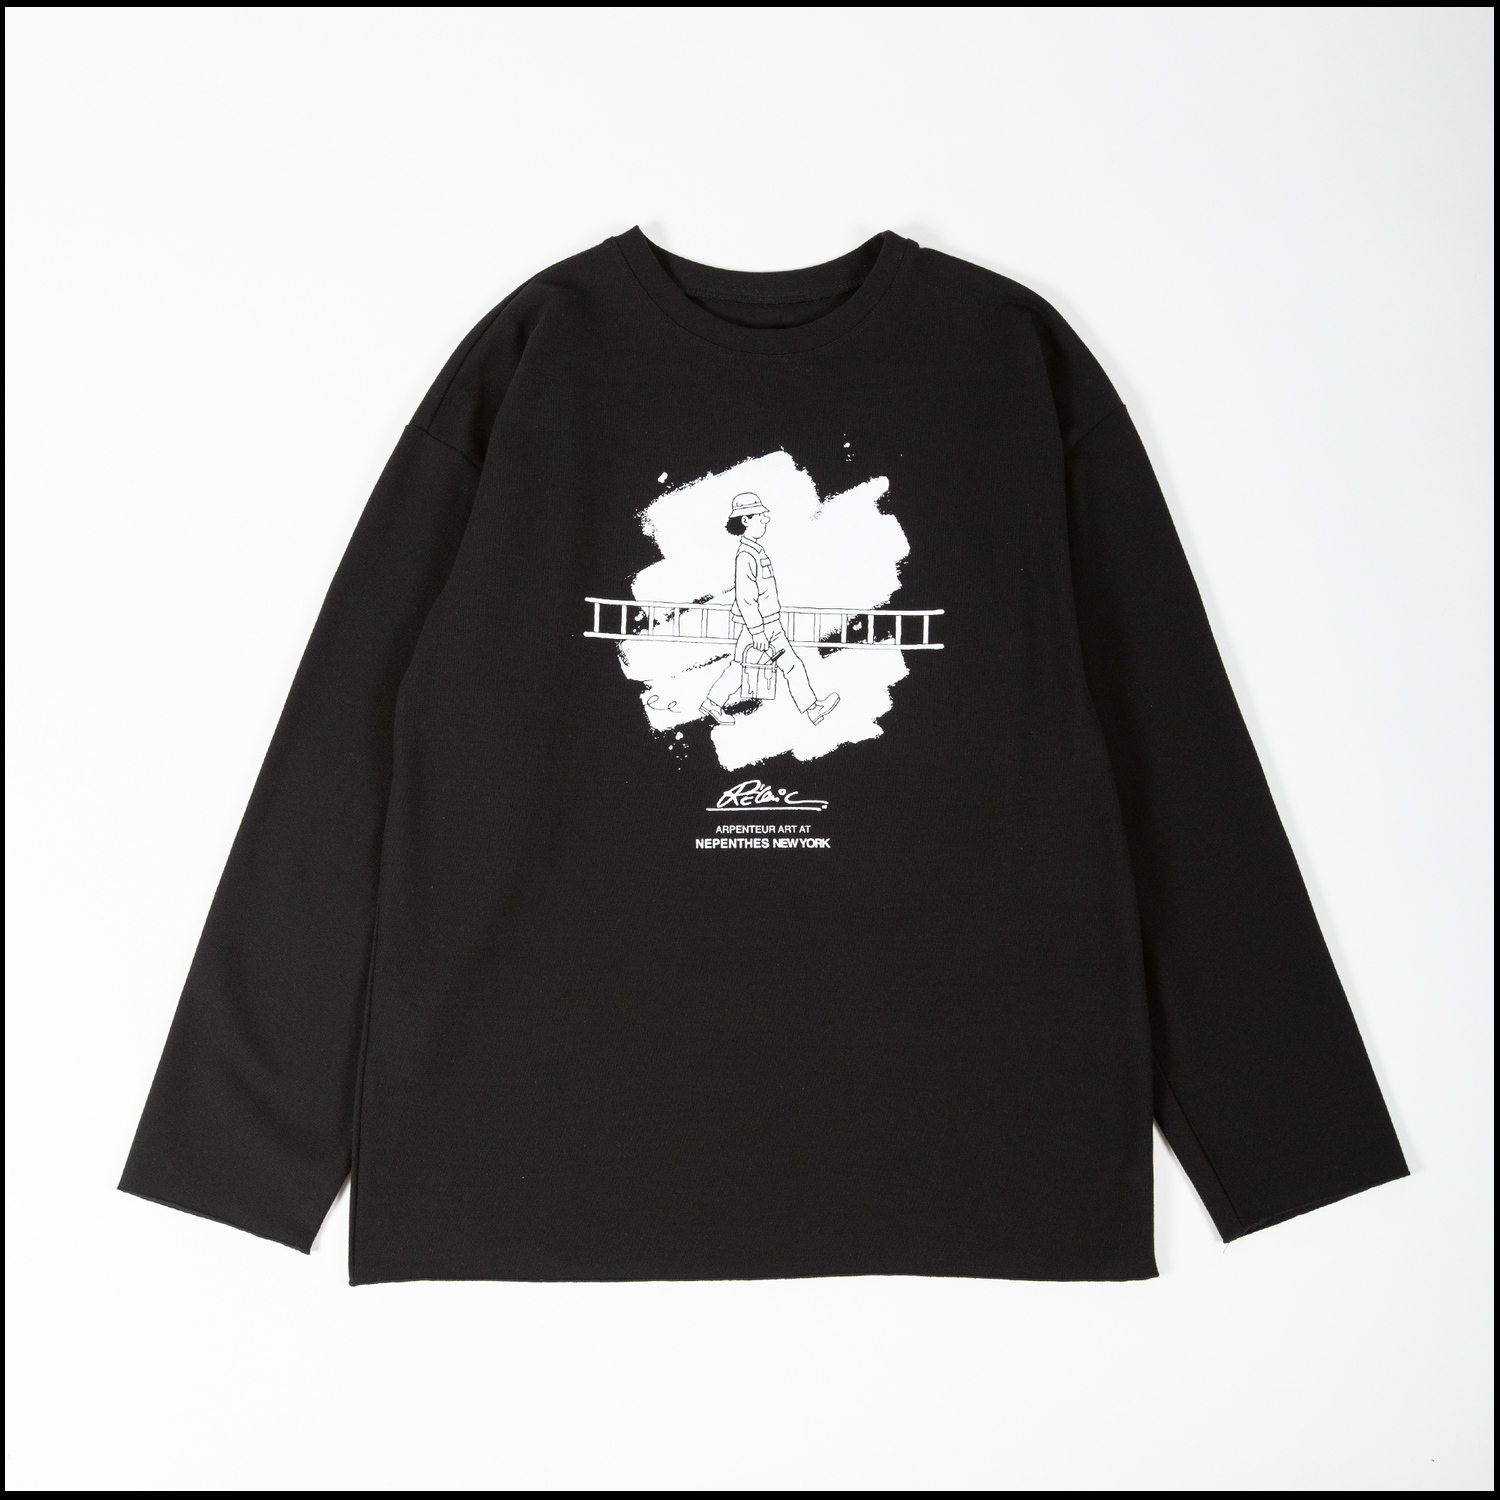 GRAPHIQUE t-shirt in Black color by Arpenteur for Nepenthes NY